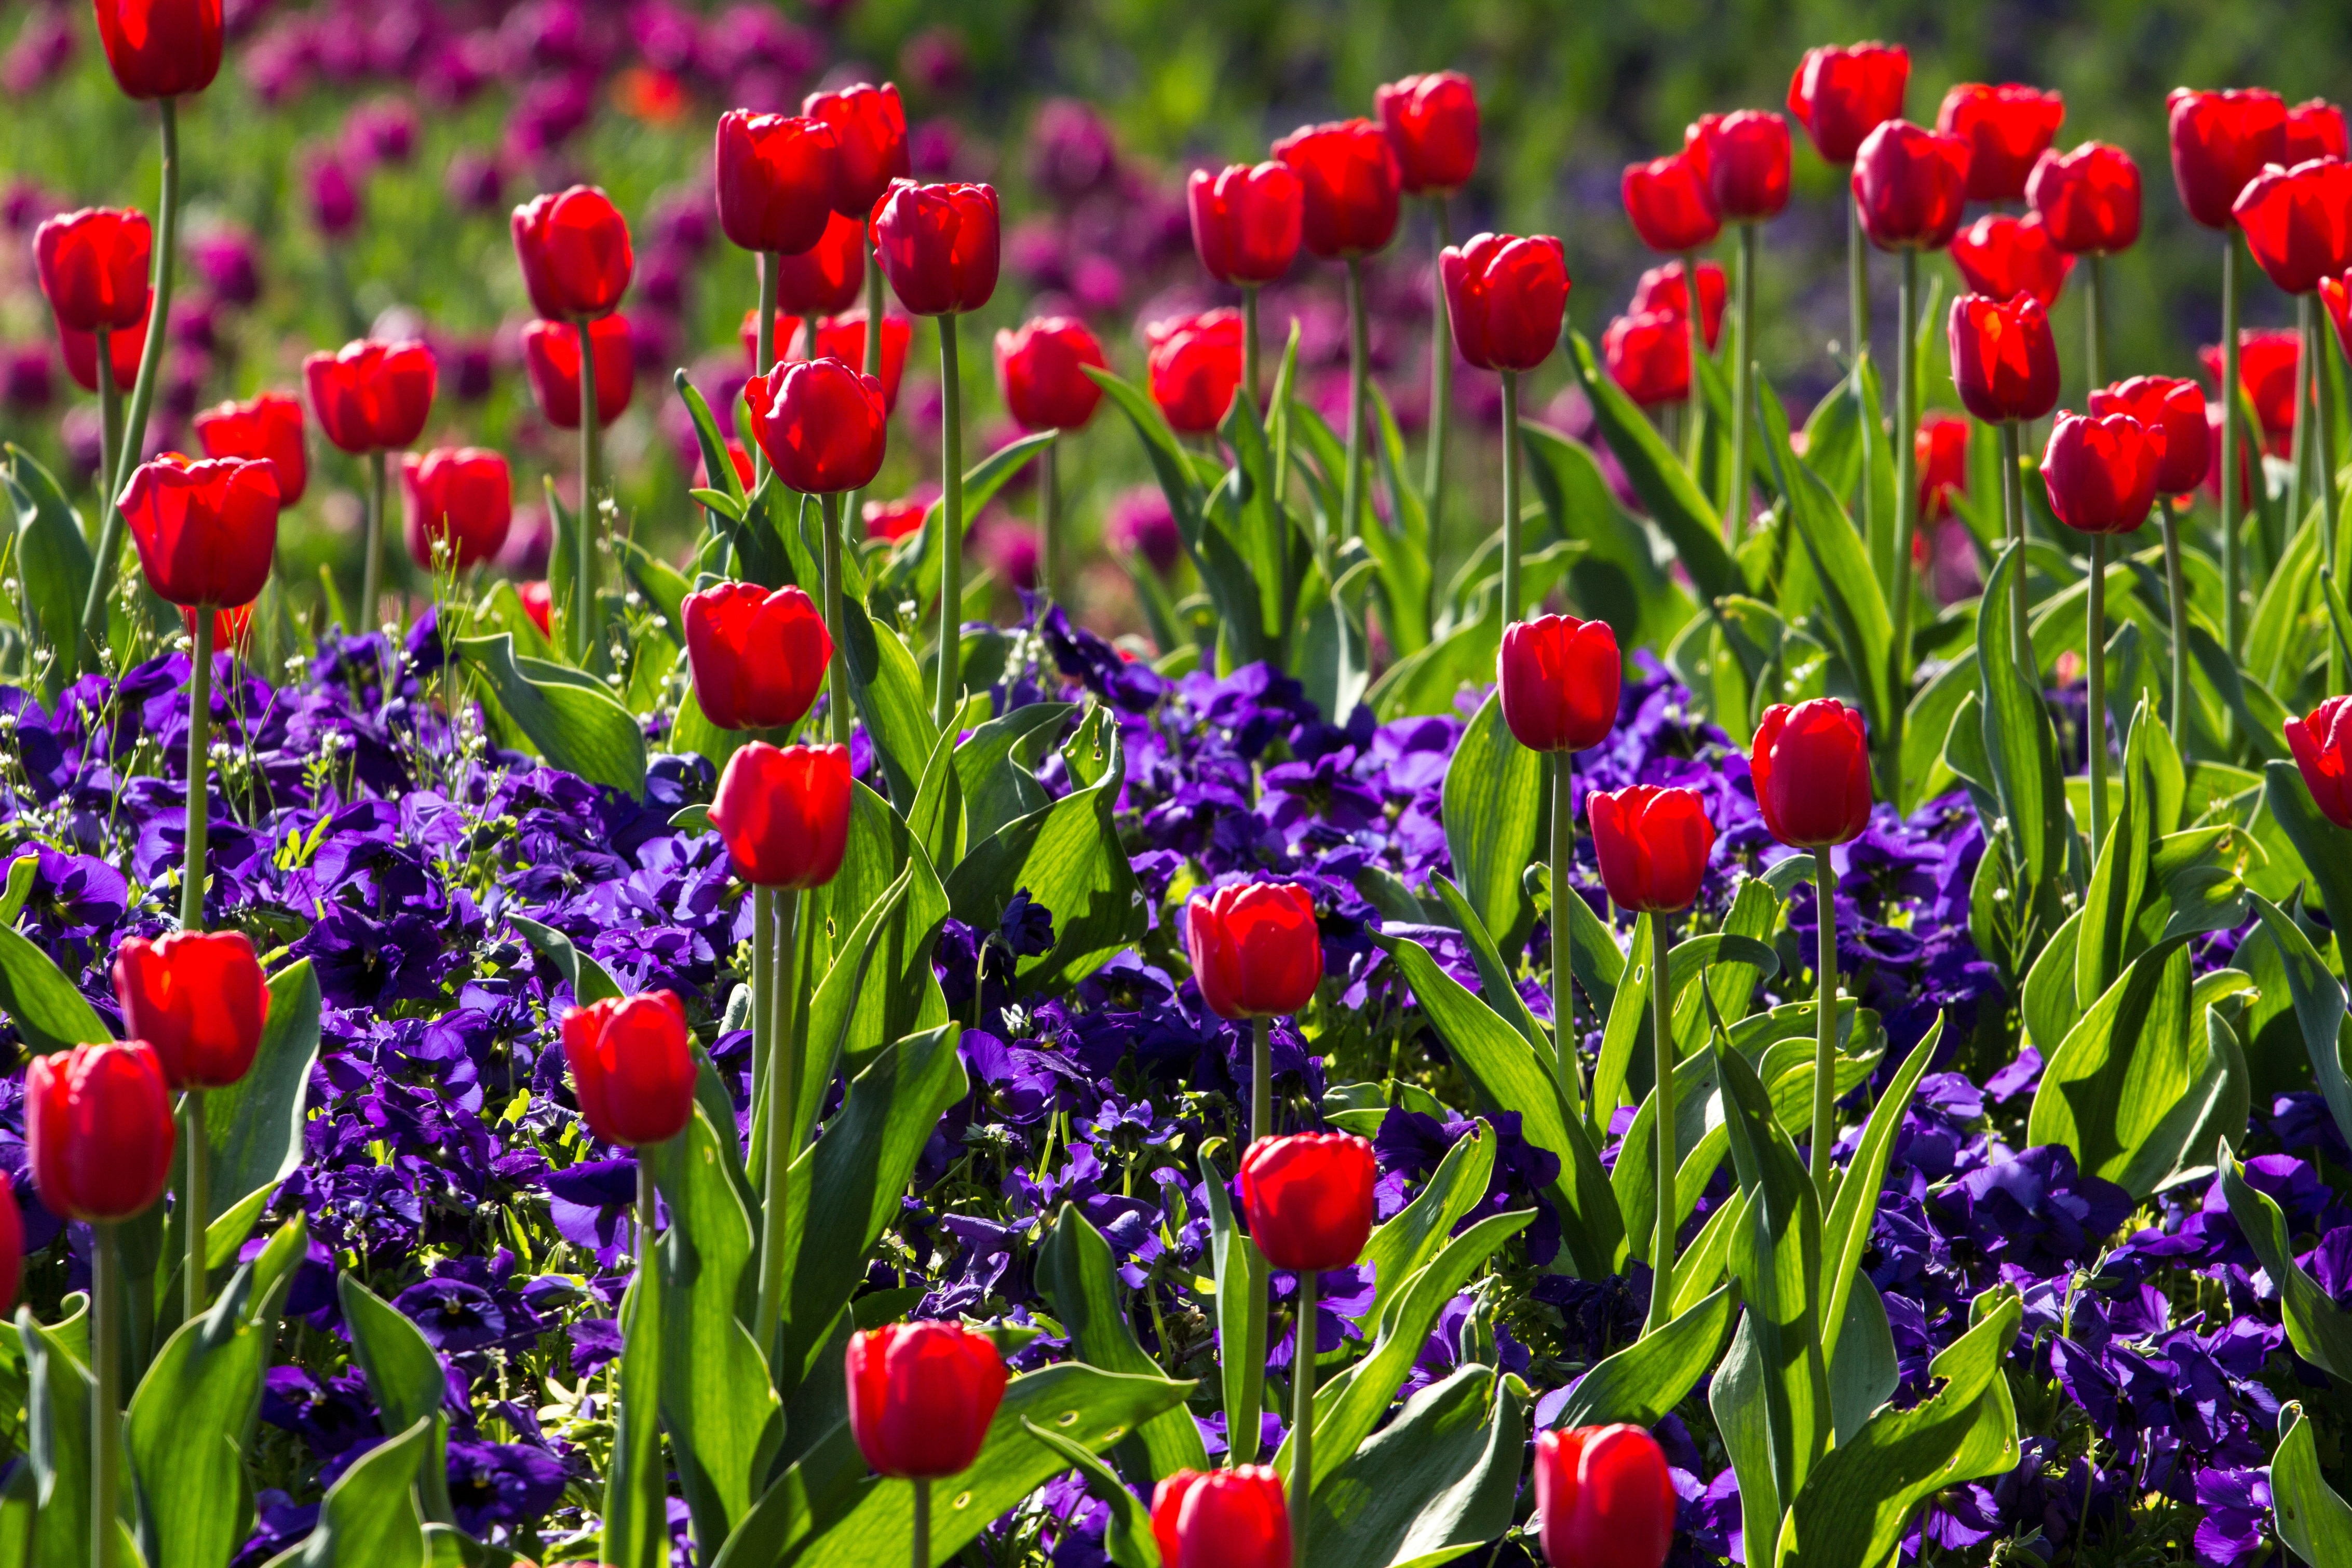 garden of red tulip flowers and purple petaled flowers